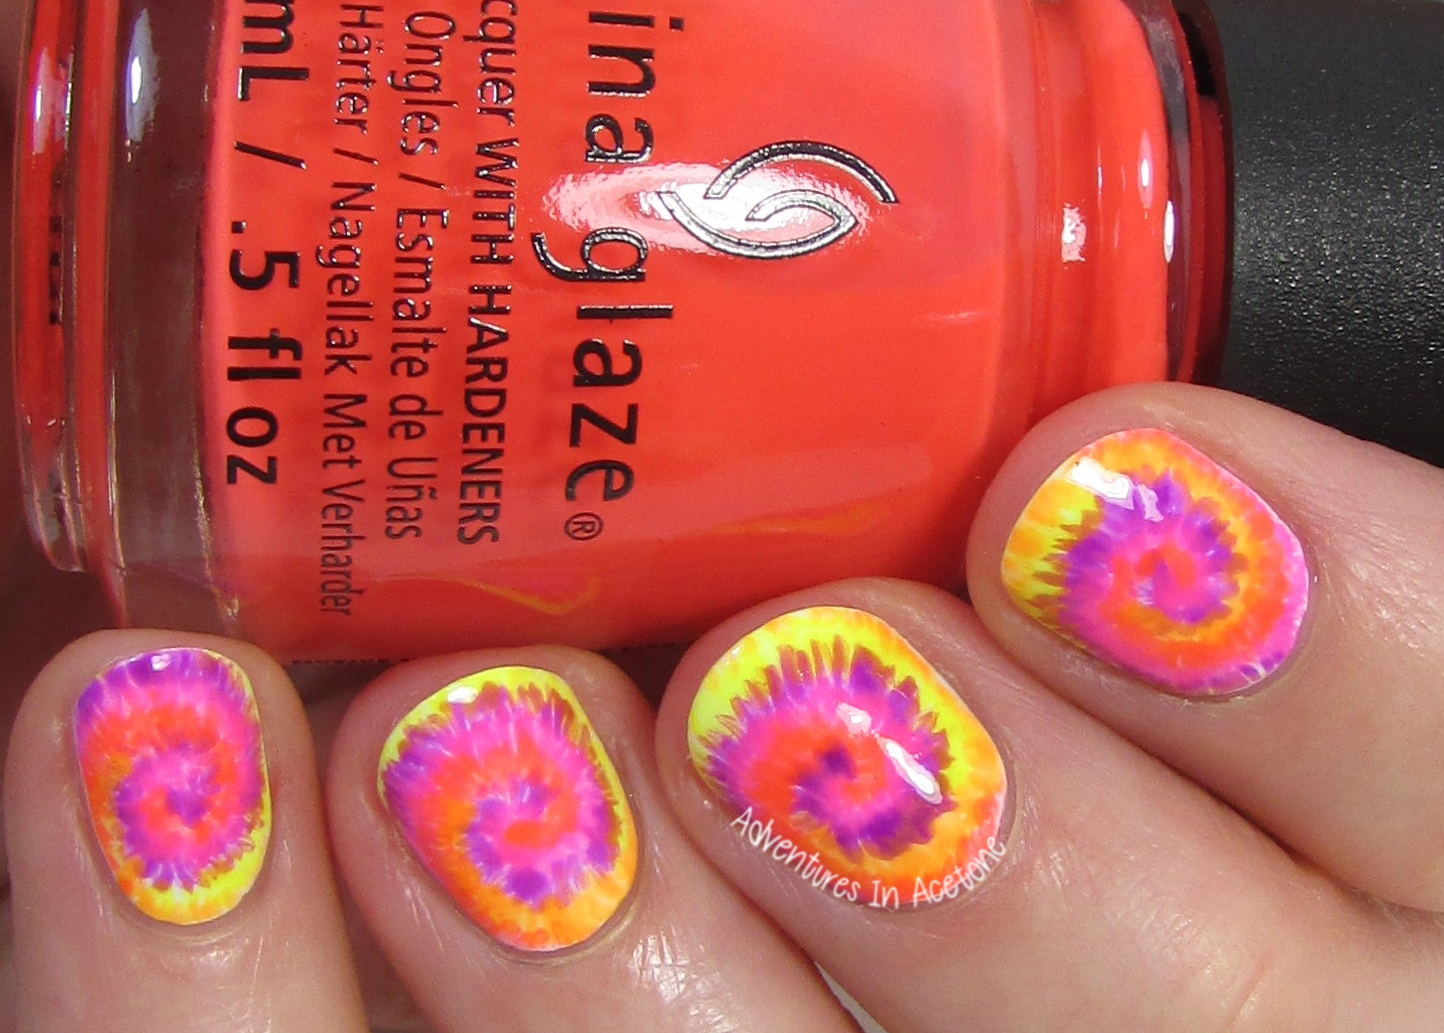 4. Tie-dye nail art from the 90s - wide 6